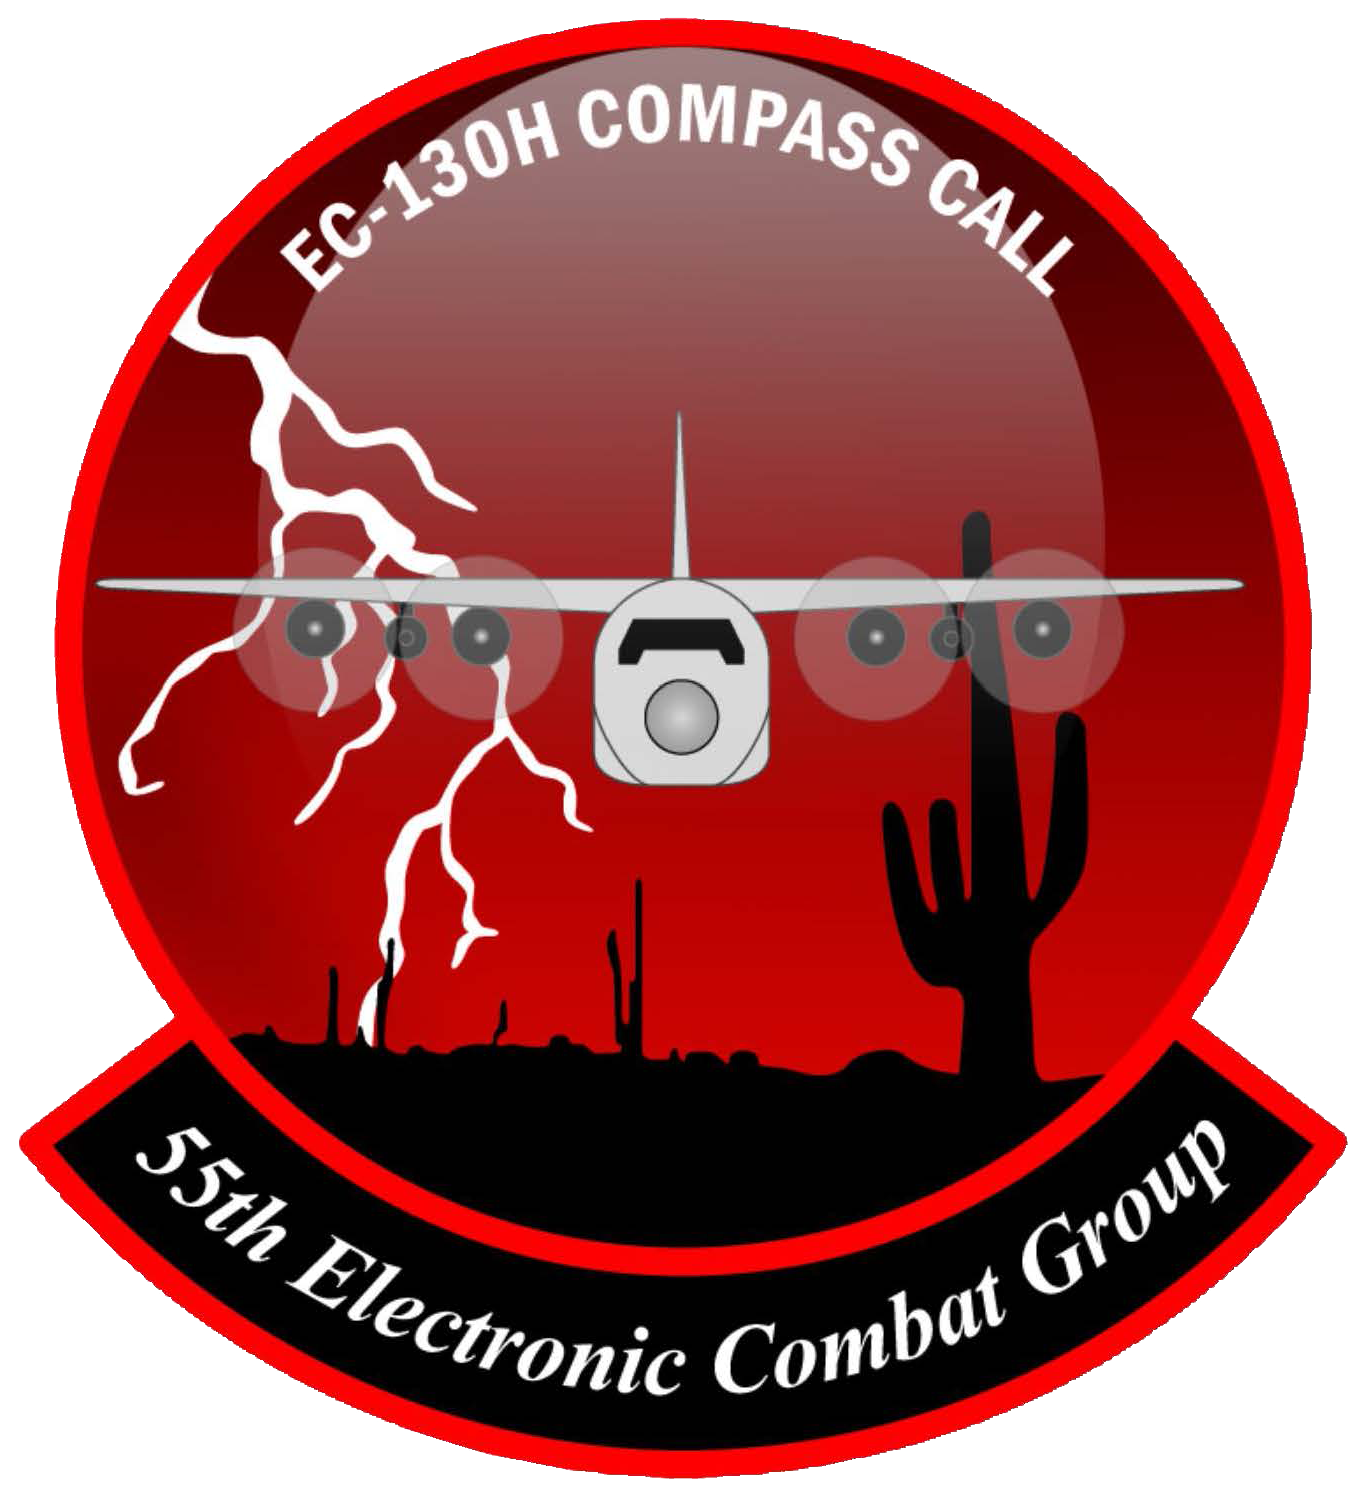 55th Electronic Combat Group